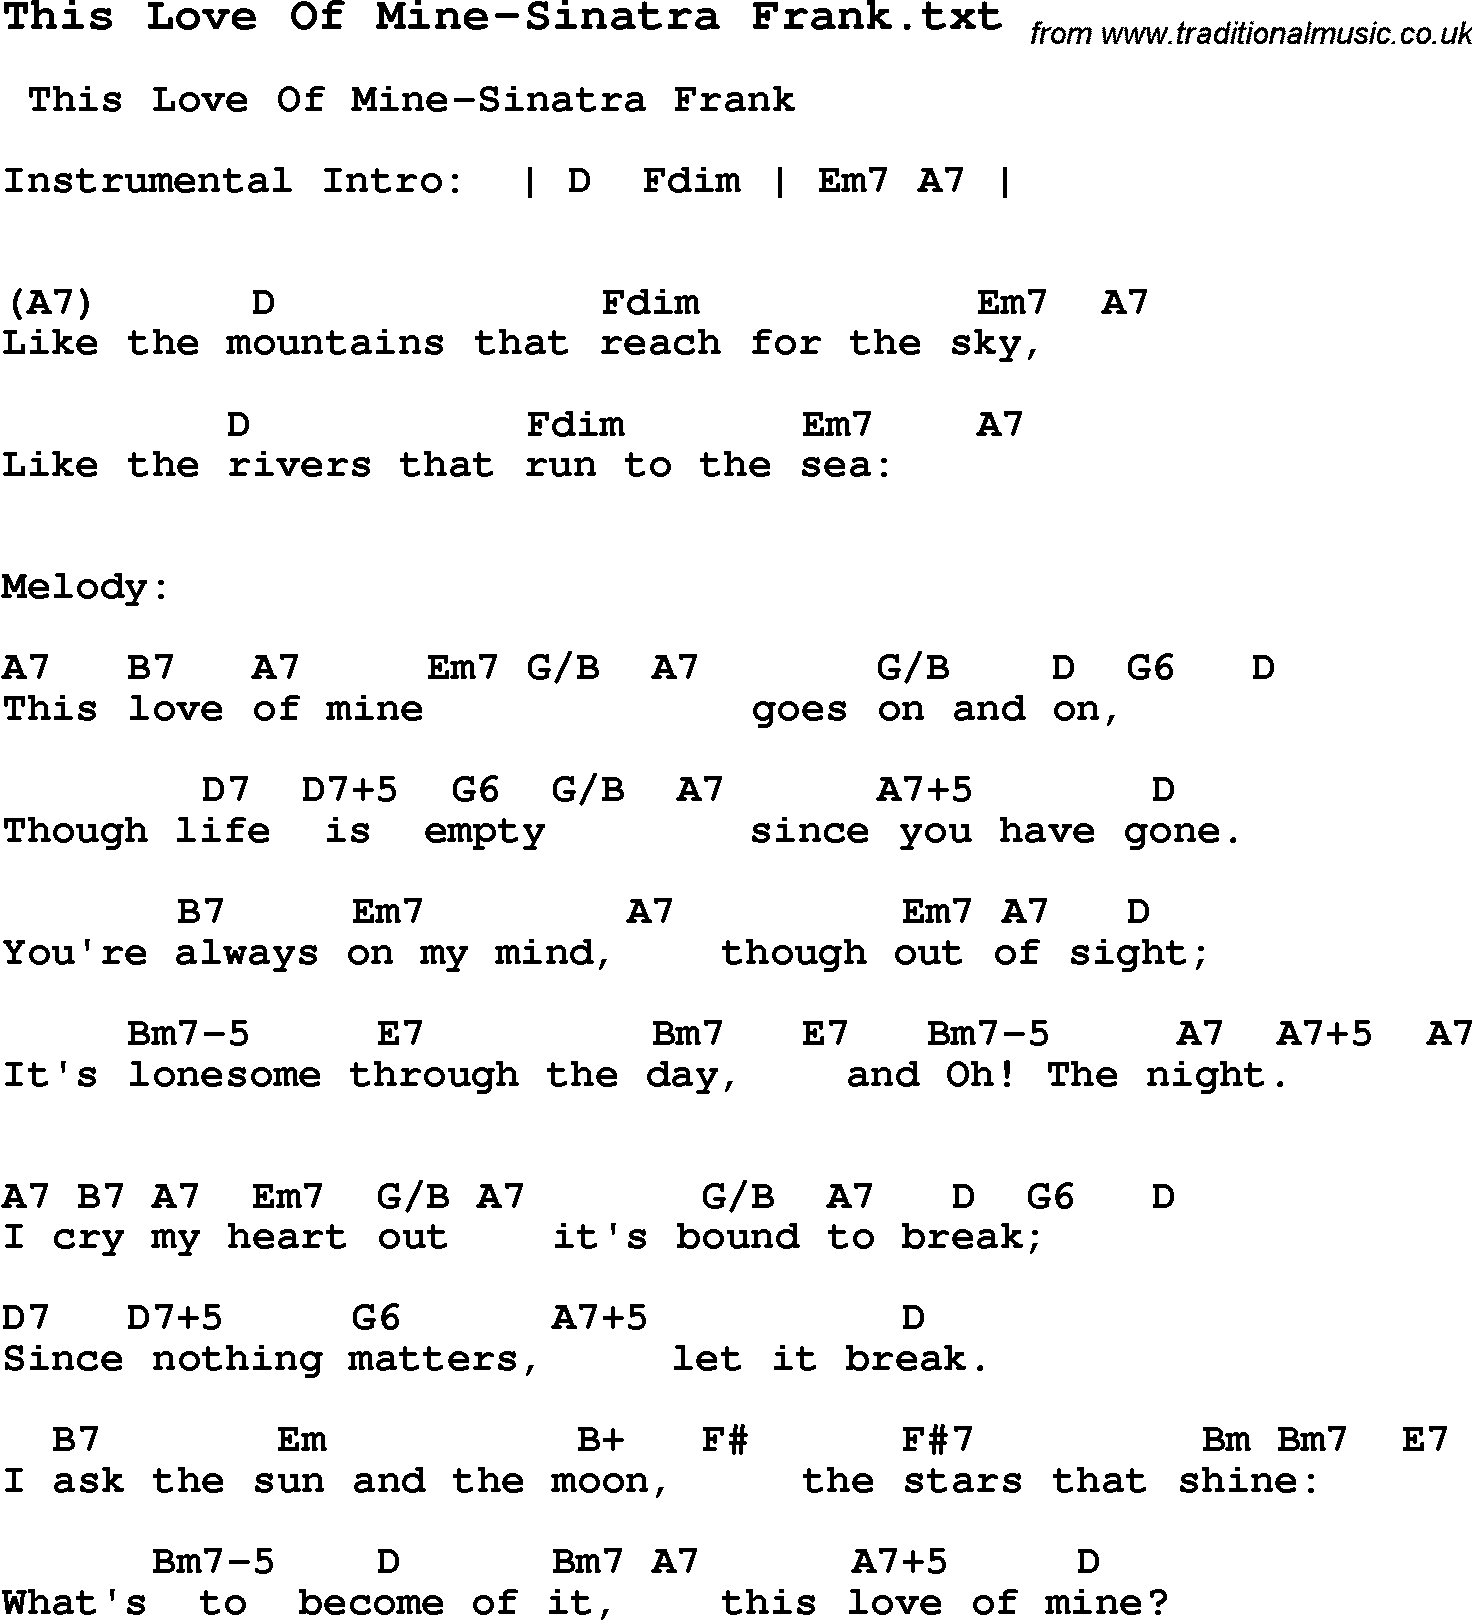 Jazz Song from top bands and vocal artists with chords, tabs and lyrics - This Love Of Mine-Sinatra Frank